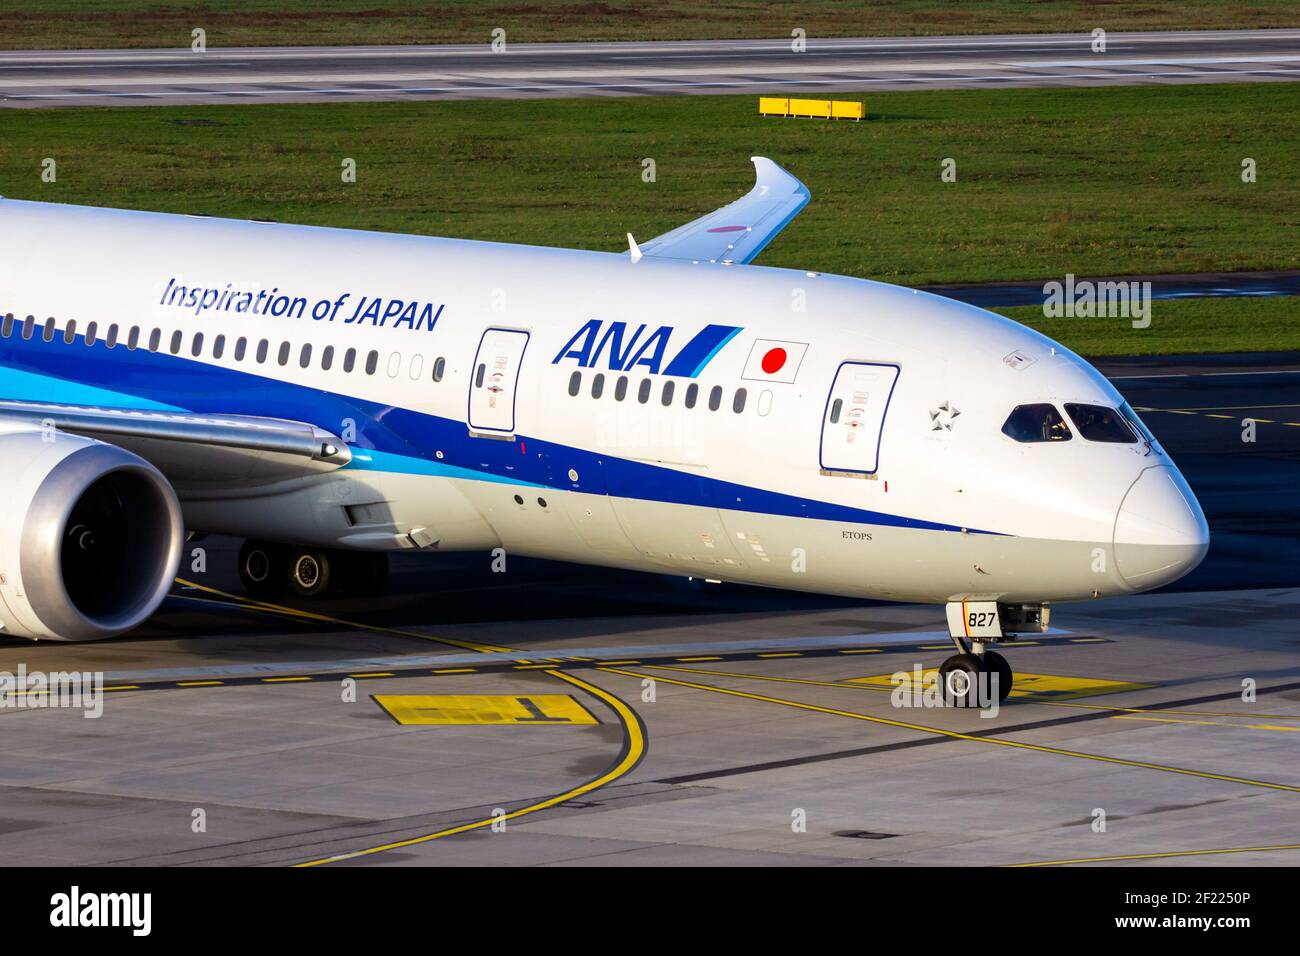 All Nippon Airways (ANA) Boeing 787 Dreamliner passenger plane arricing at Dusseldorf Airport. Germany - February 7, 2020 Stock Photo